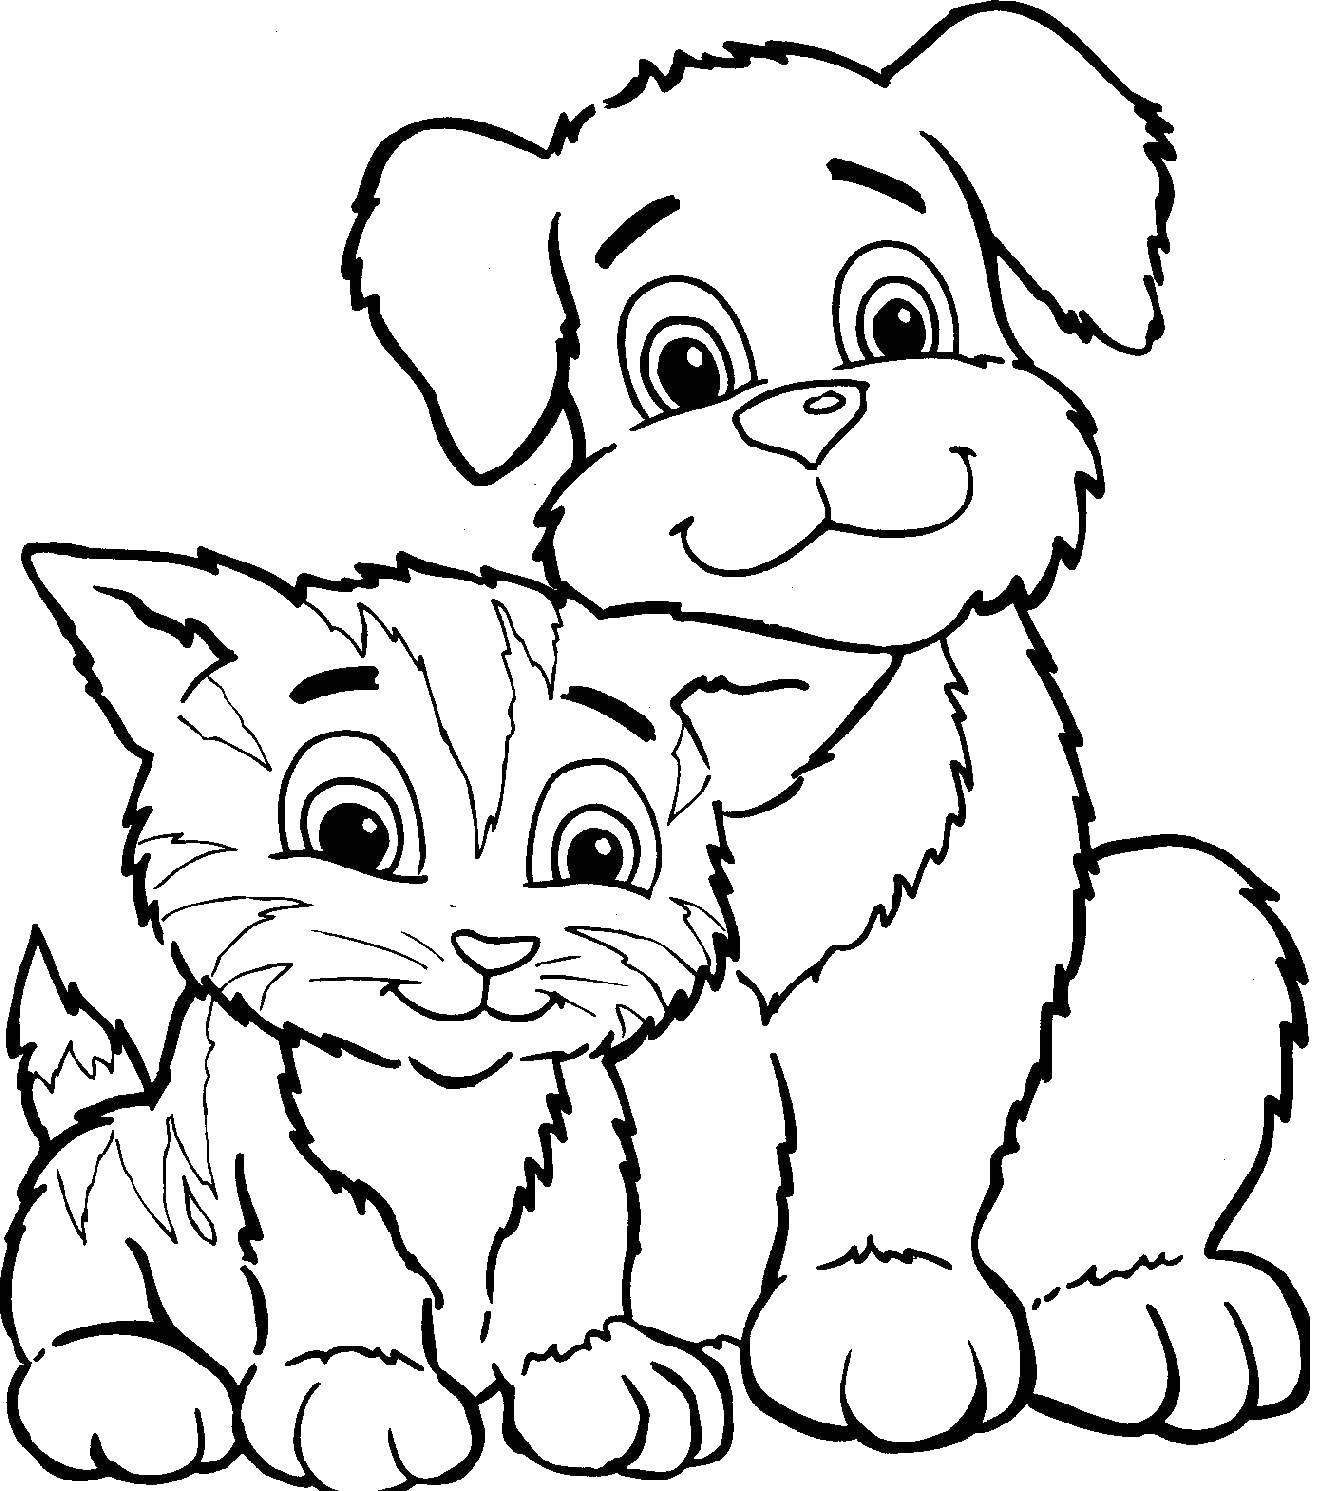 Coloring Best friends kitten and puppy. Category animals. Tags:  Animals, dog, cat.